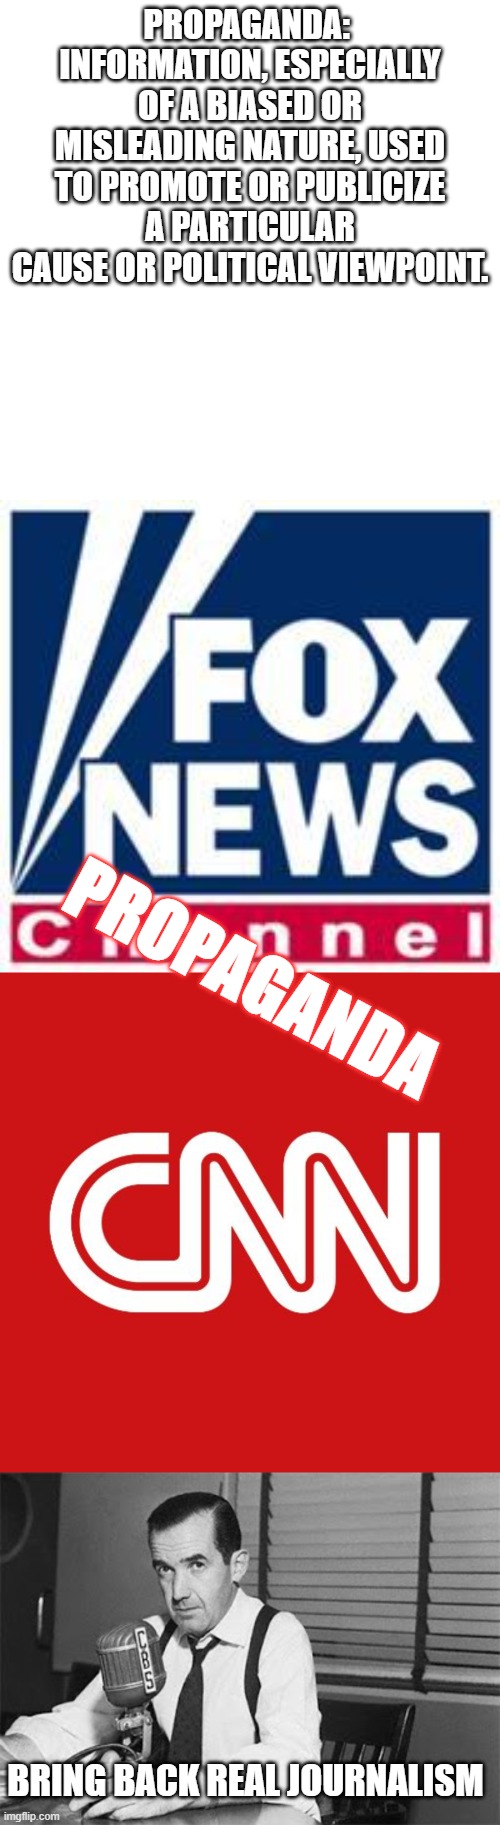 Bring Back Real Journalism | PROPAGANDA:  INFORMATION, ESPECIALLY OF A BIASED OR MISLEADING NATURE, USED TO PROMOTE OR PUBLICIZE A PARTICULAR CAUSE OR POLITICAL VIEWPOINT. PROPAGANDA; BRING BACK REAL JOURNALISM | image tagged in memes,fox news,cnn,edward r murrow,politics,propaganda | made w/ Imgflip meme maker